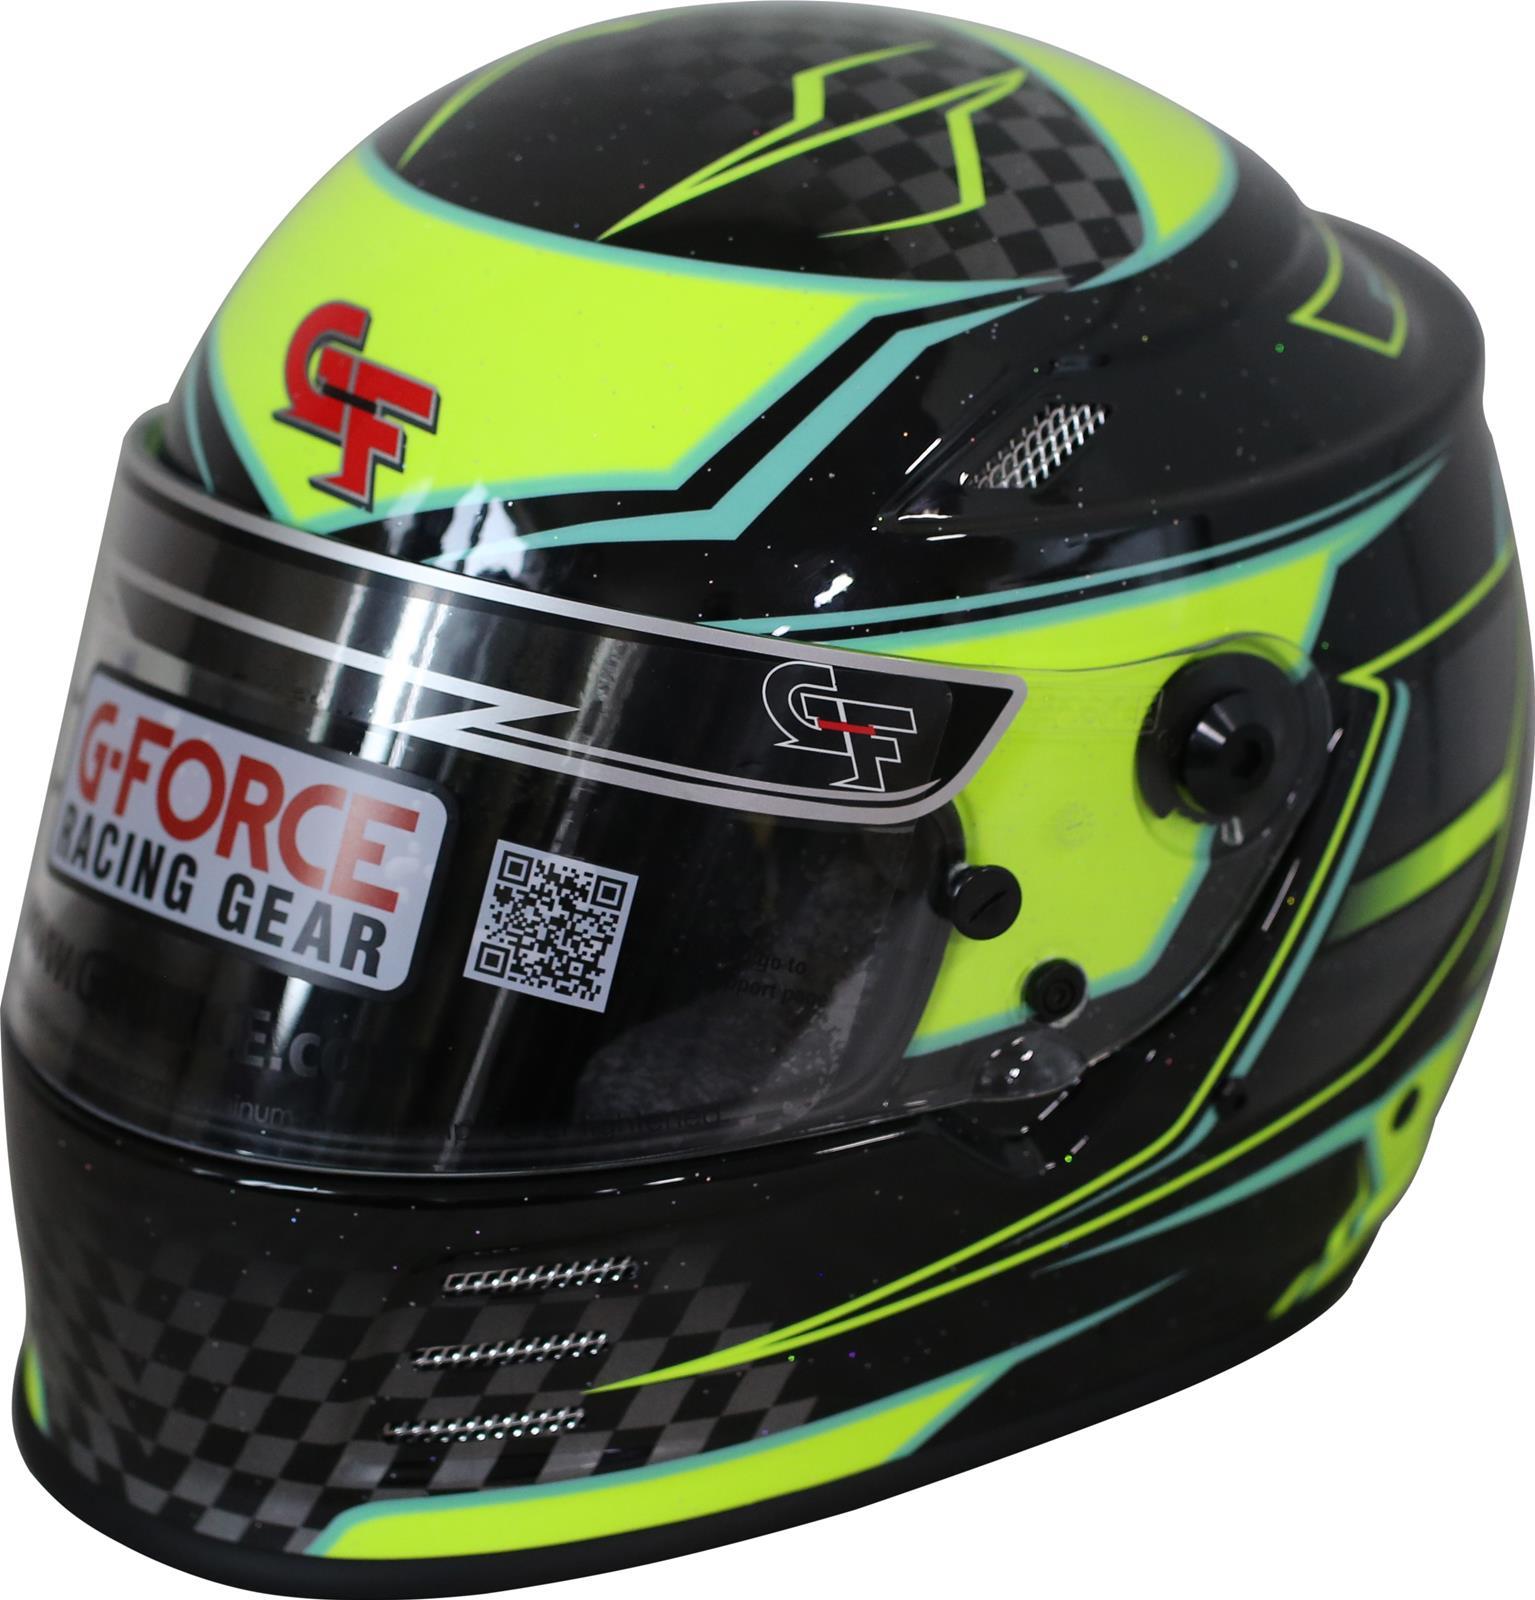 G-Force HELMET REVO GRAPHICS XLG YELLOW SA2020 Helmets and Accessories Helmets main image